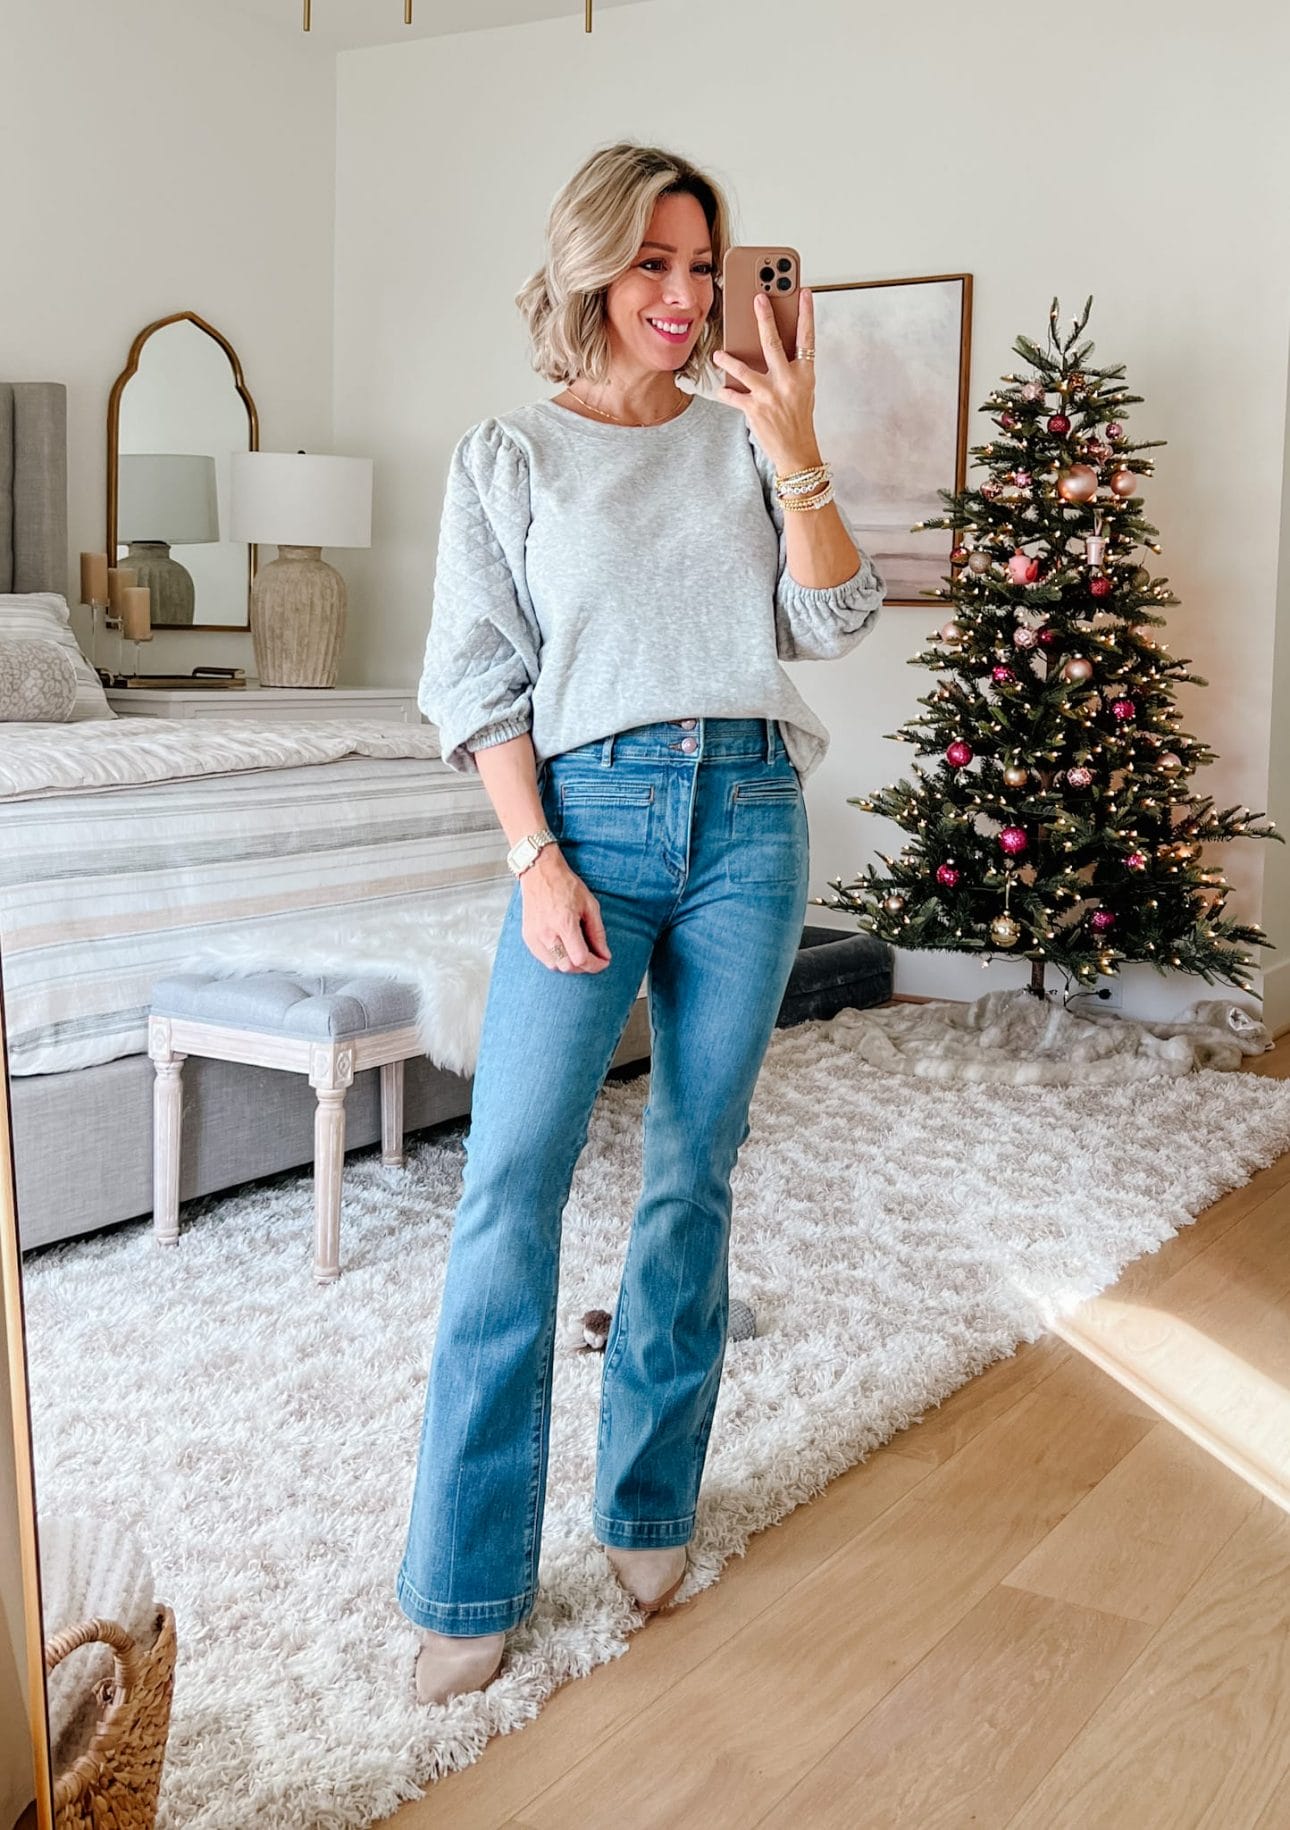 Quilted Sleeve Sweater, Jeans, Booties 